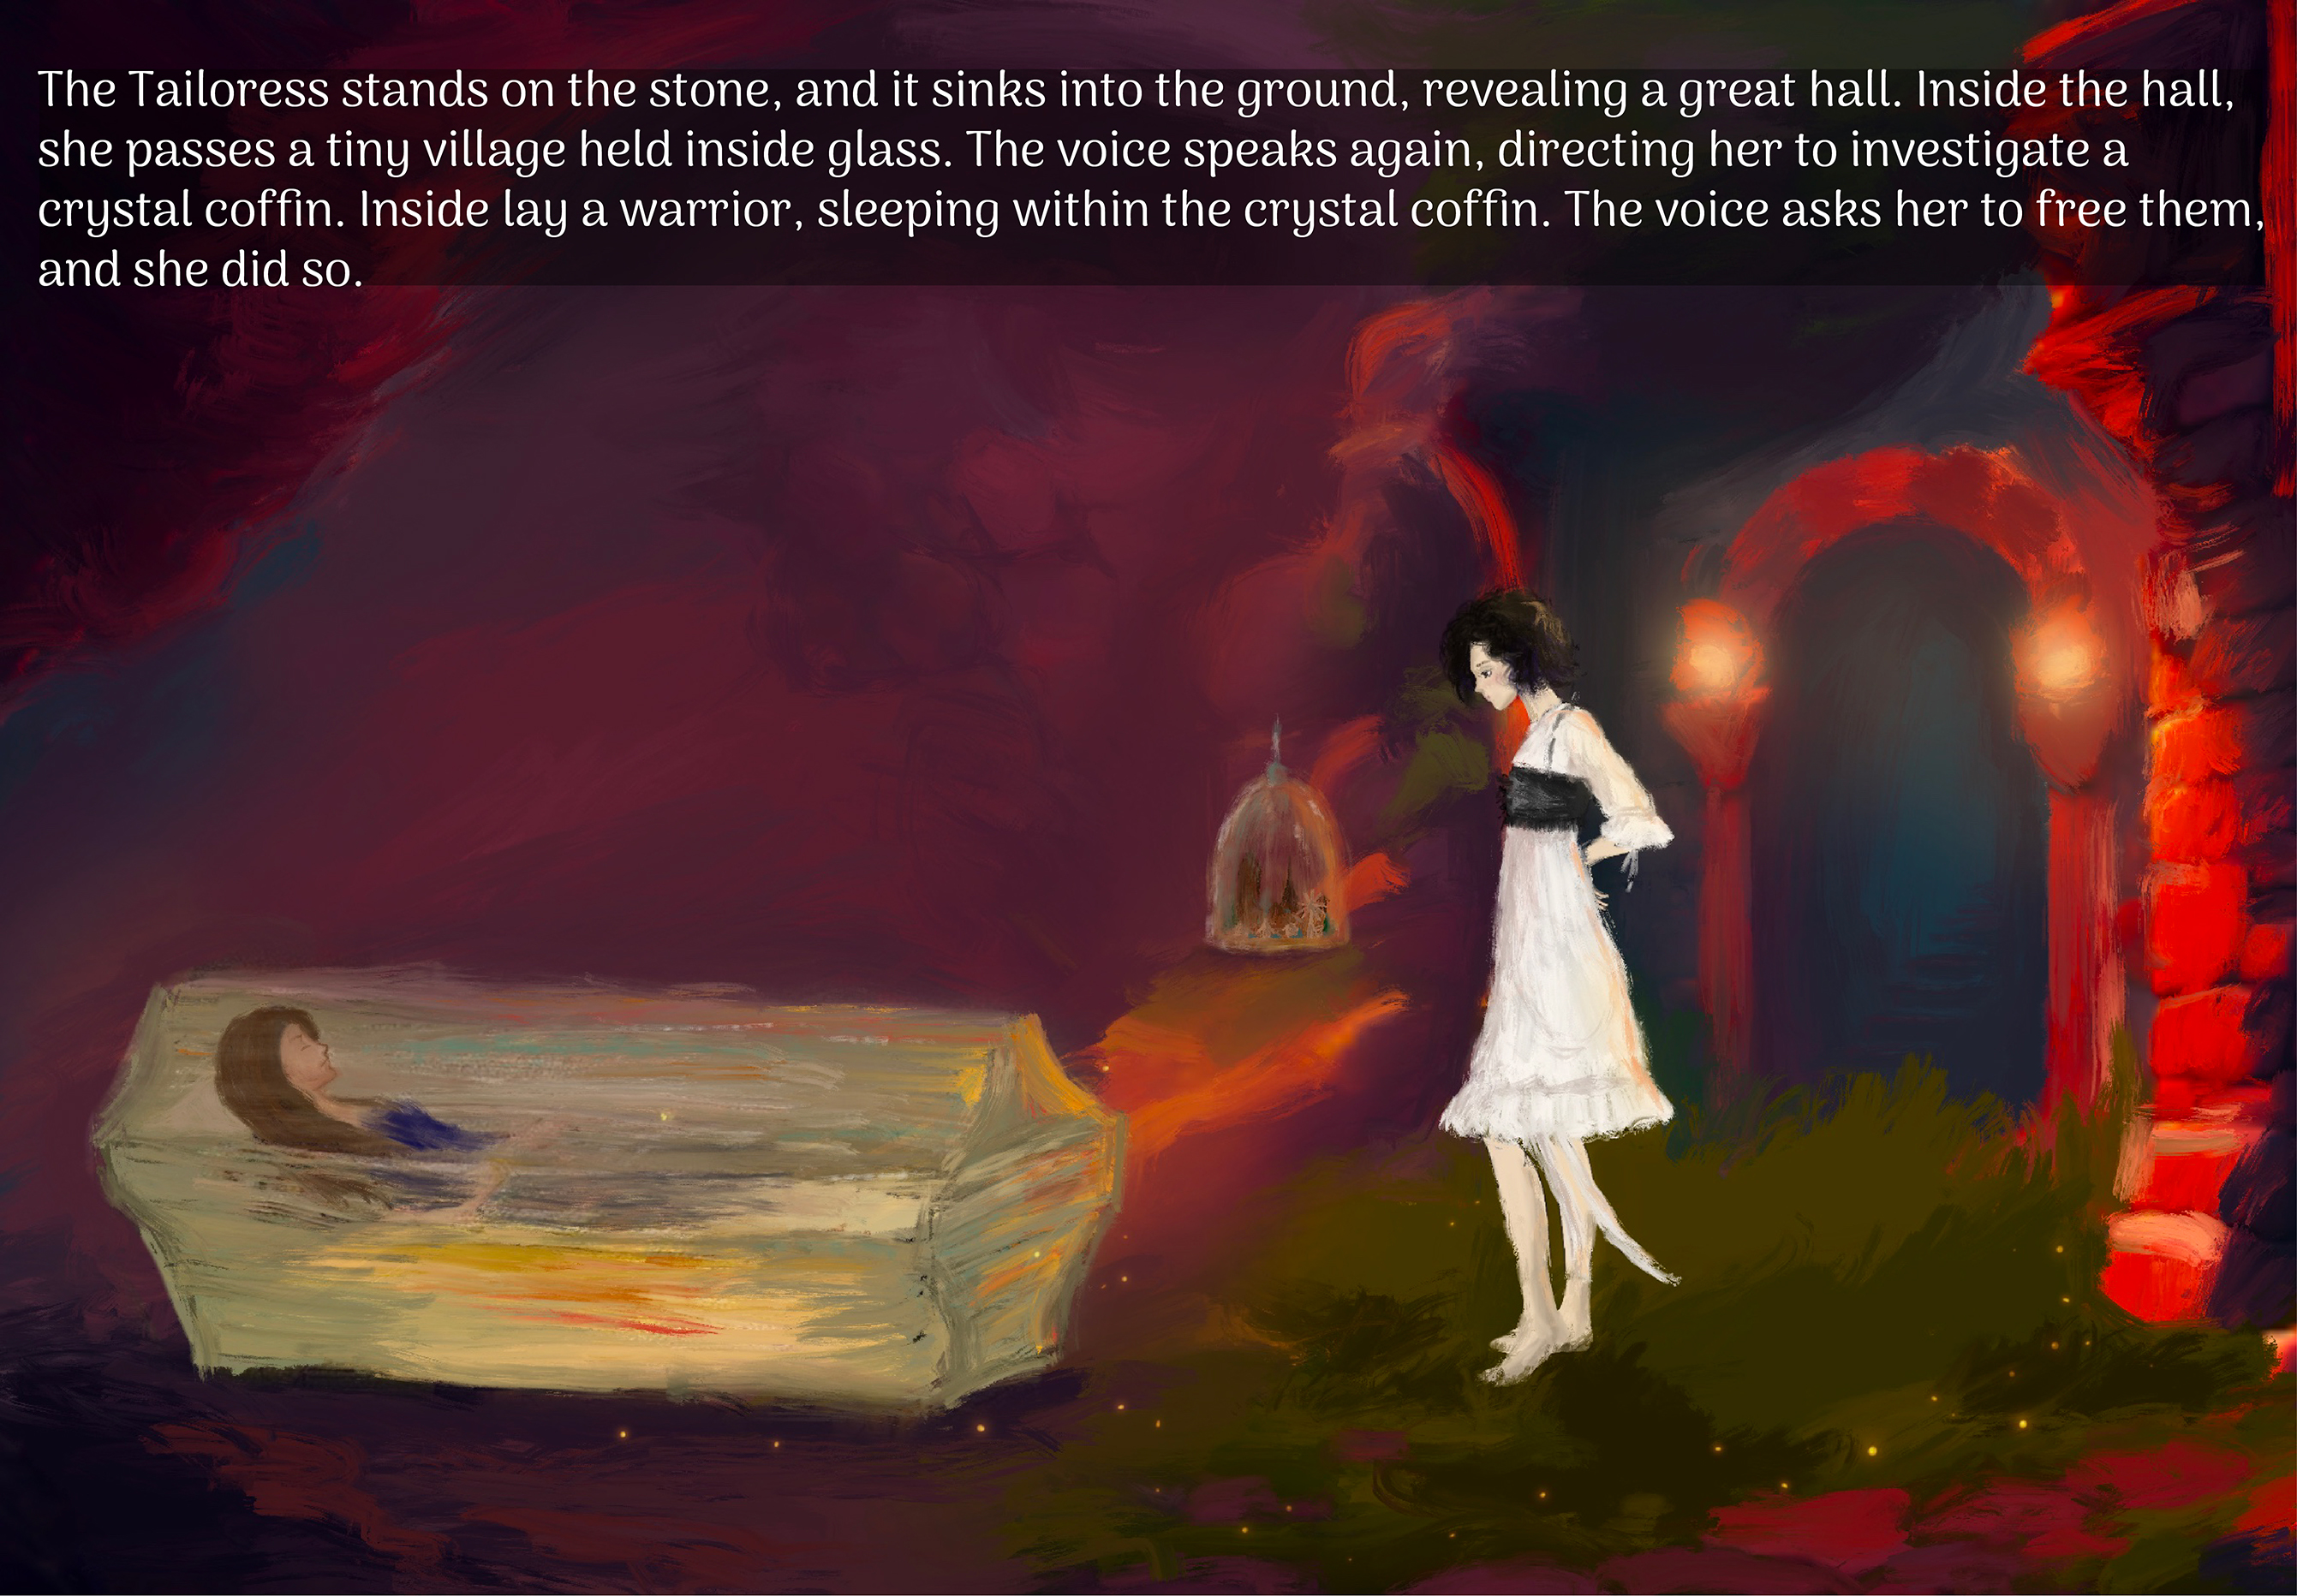 “The Crystal Coffin” - The Illustrated Story Scene 6